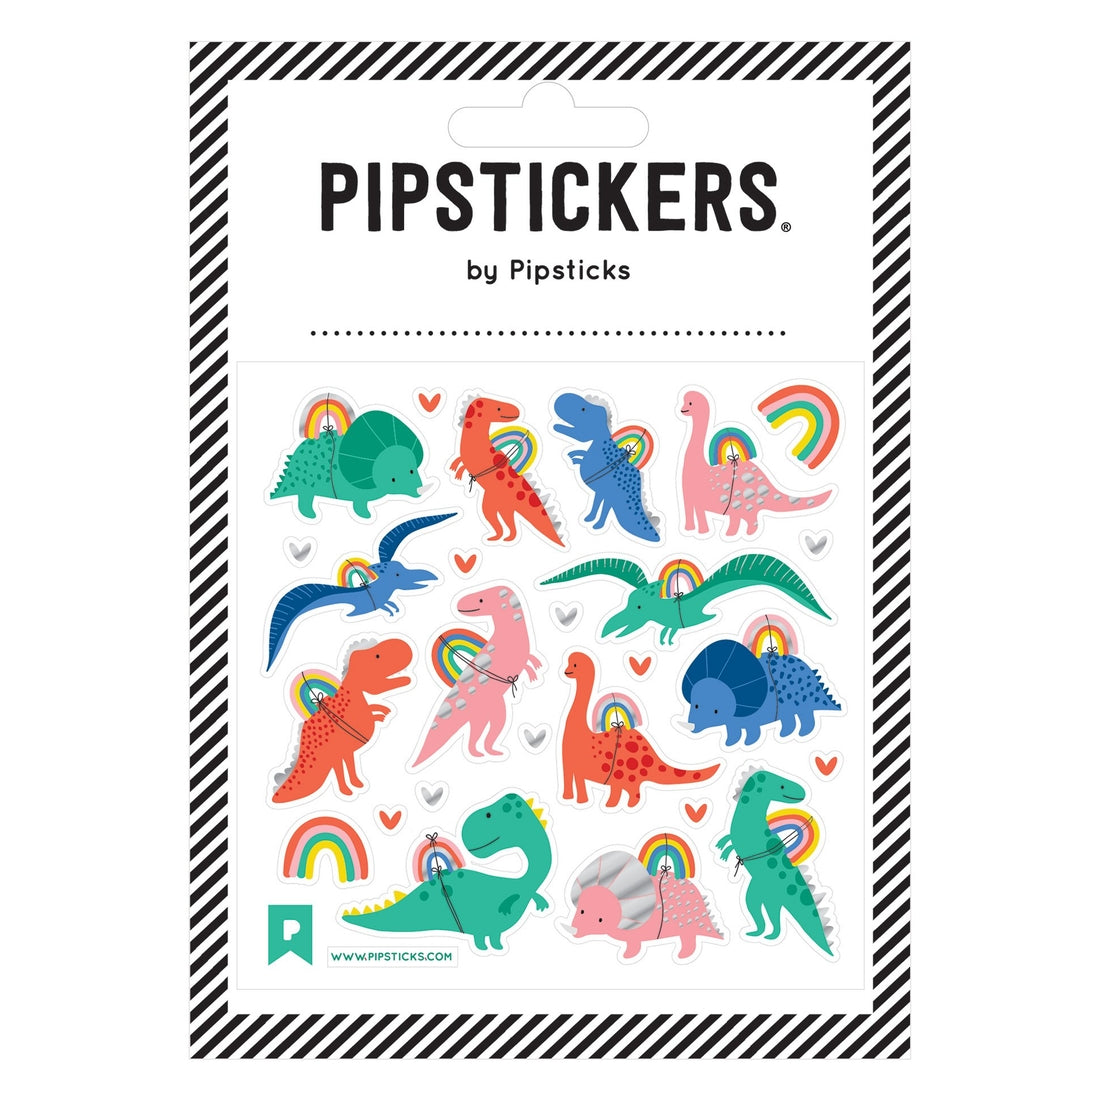 Stickers of colorful dinosaurs with rainbows tied to their backs